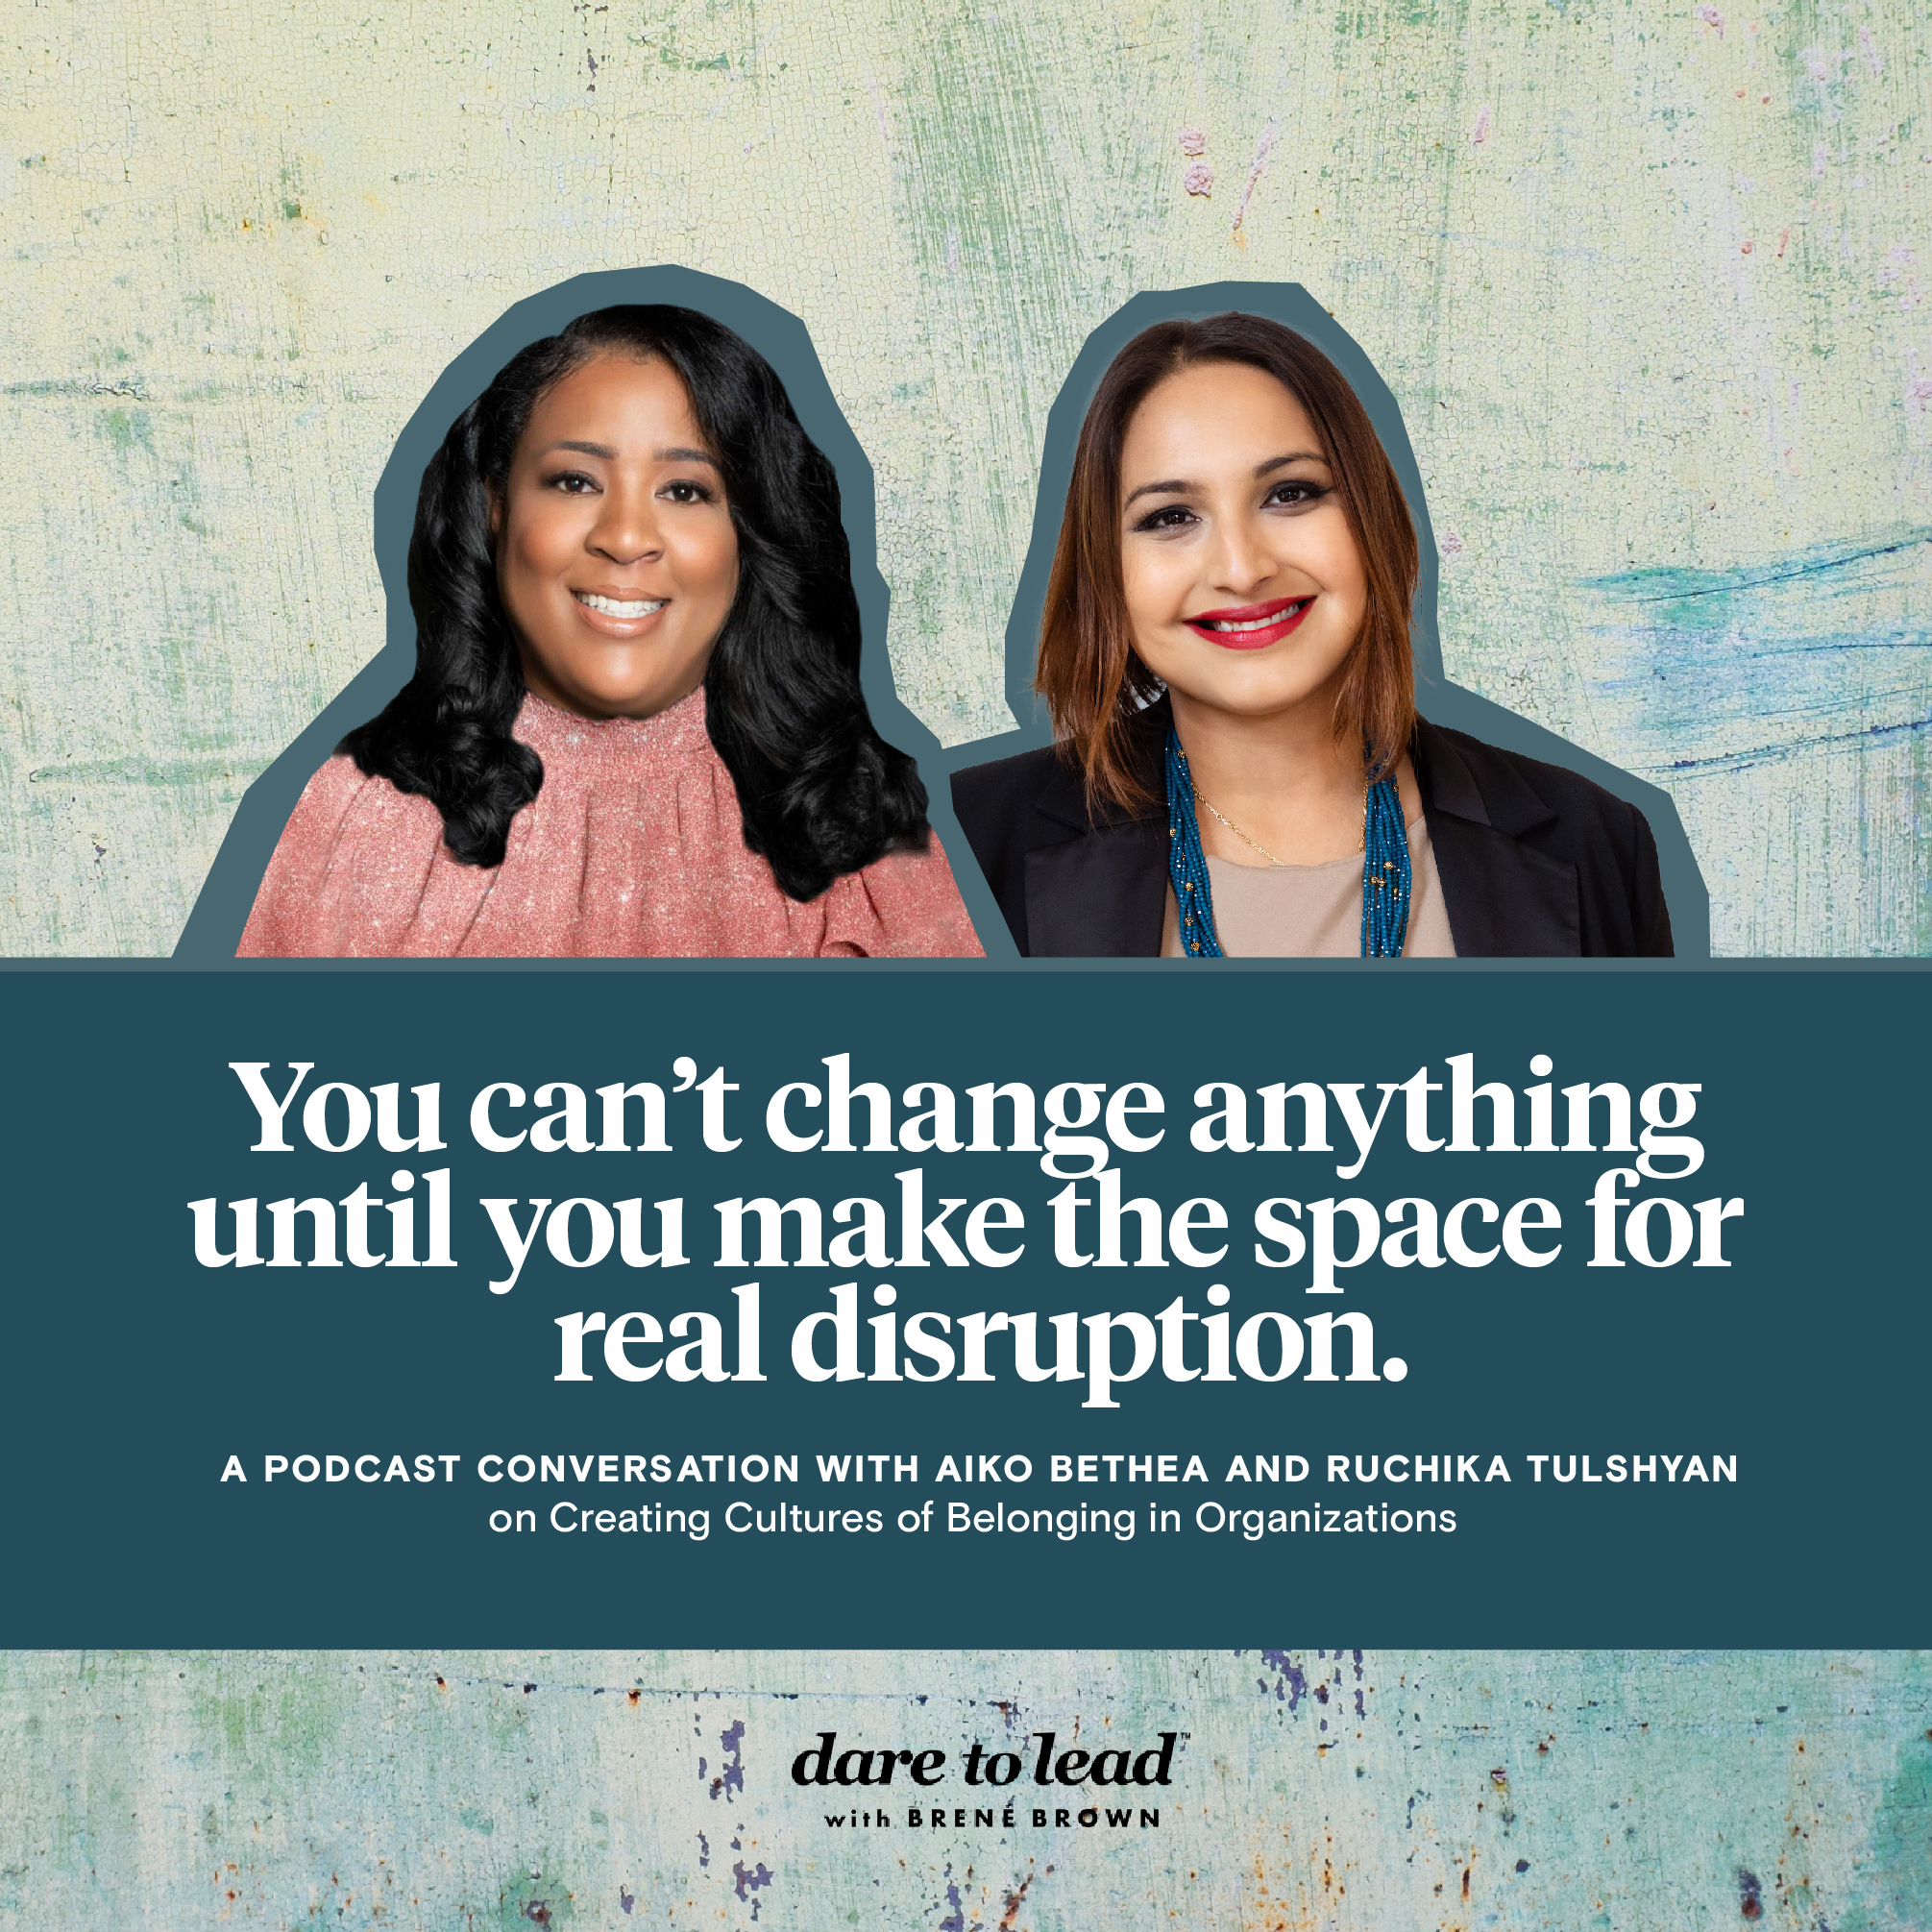 A word from the Dare to Lead conversation with Aiko Bethea and Ruchika Tulshyan on creating cultures of belonging in organizations: You can’t change anything until you make the space for real disruption.